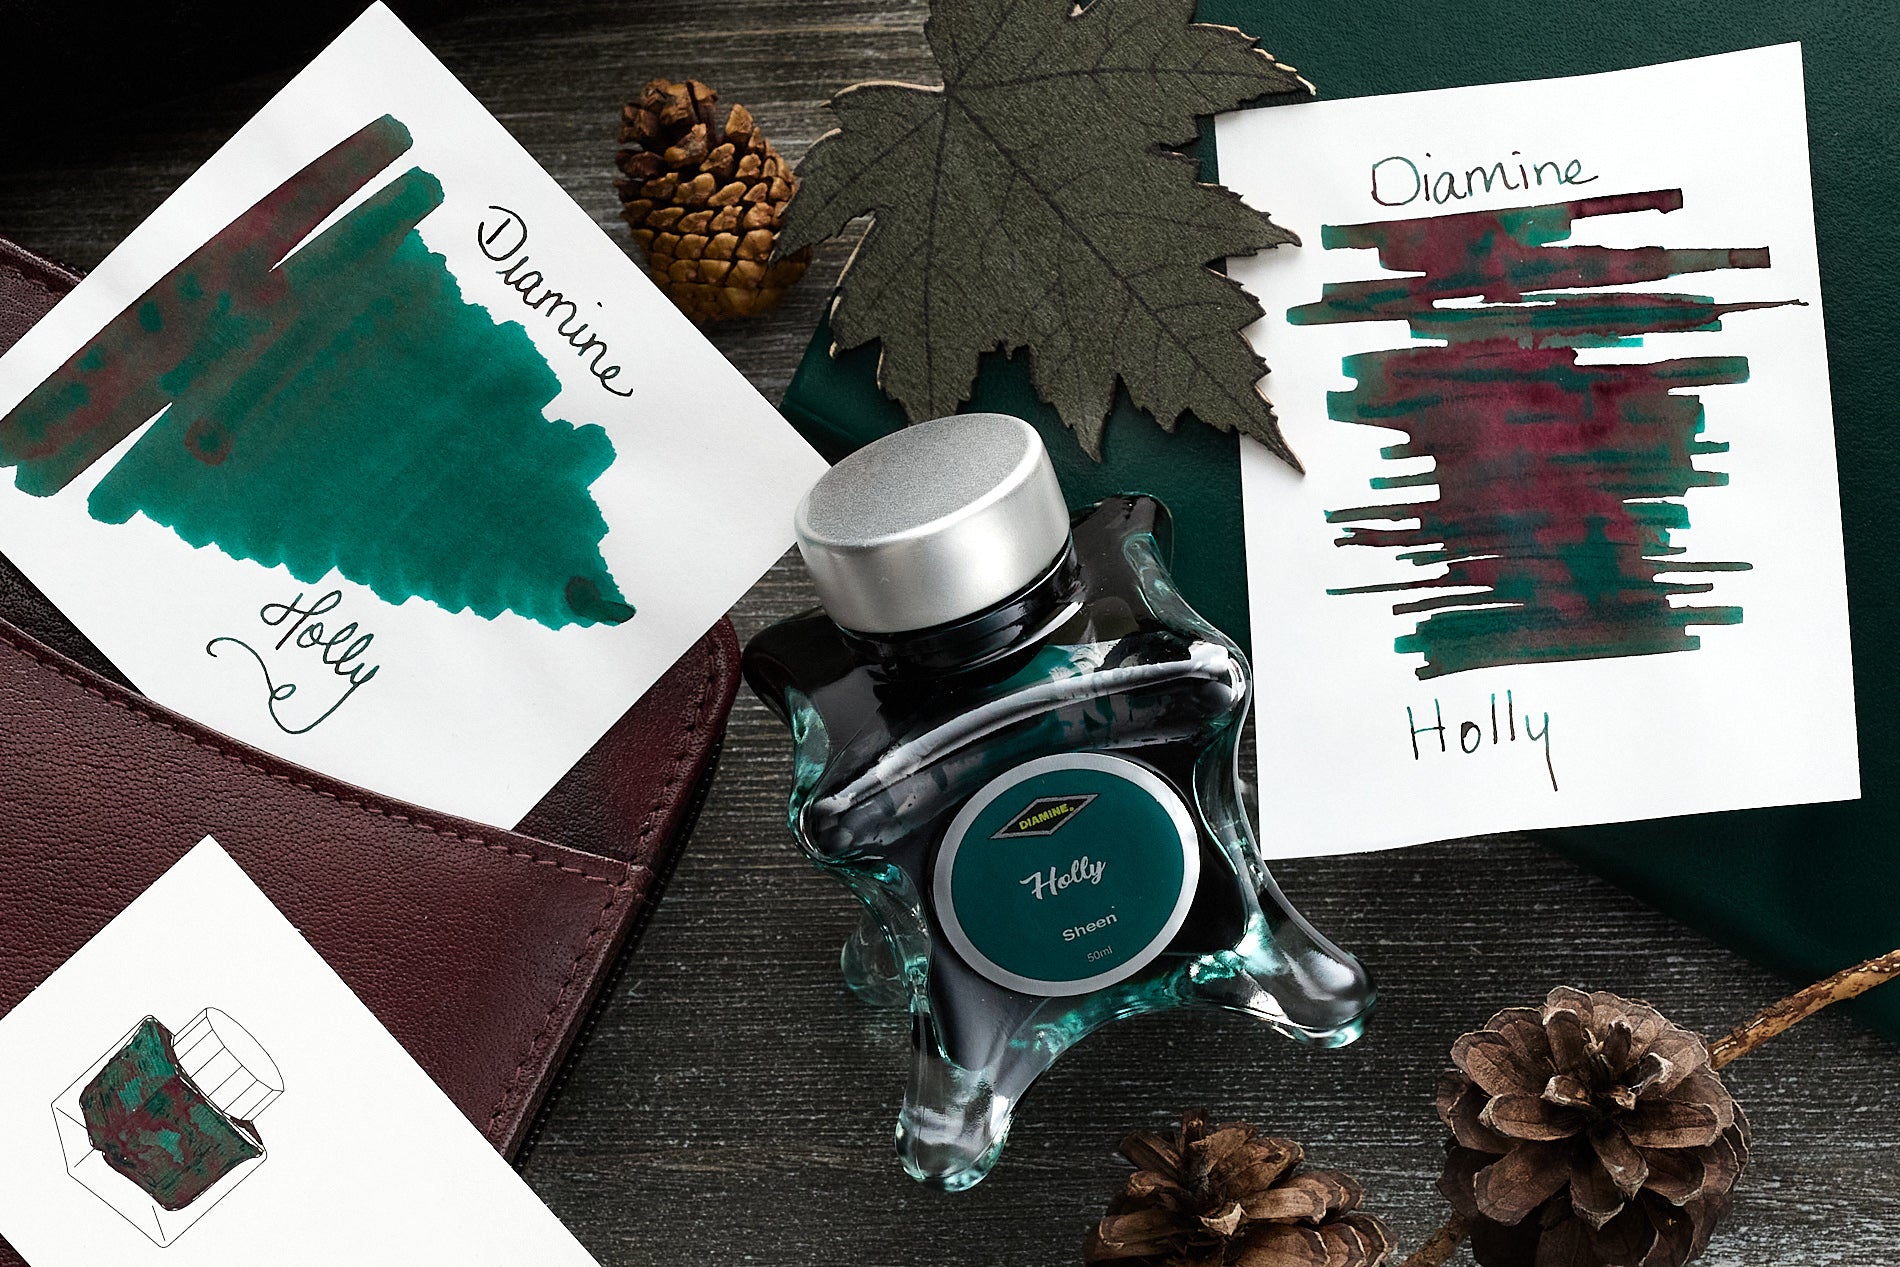 Diamine Holly Fountain Pen Ink writing sample, and swabs, along with the bottle and pinecones on a wooden desk background